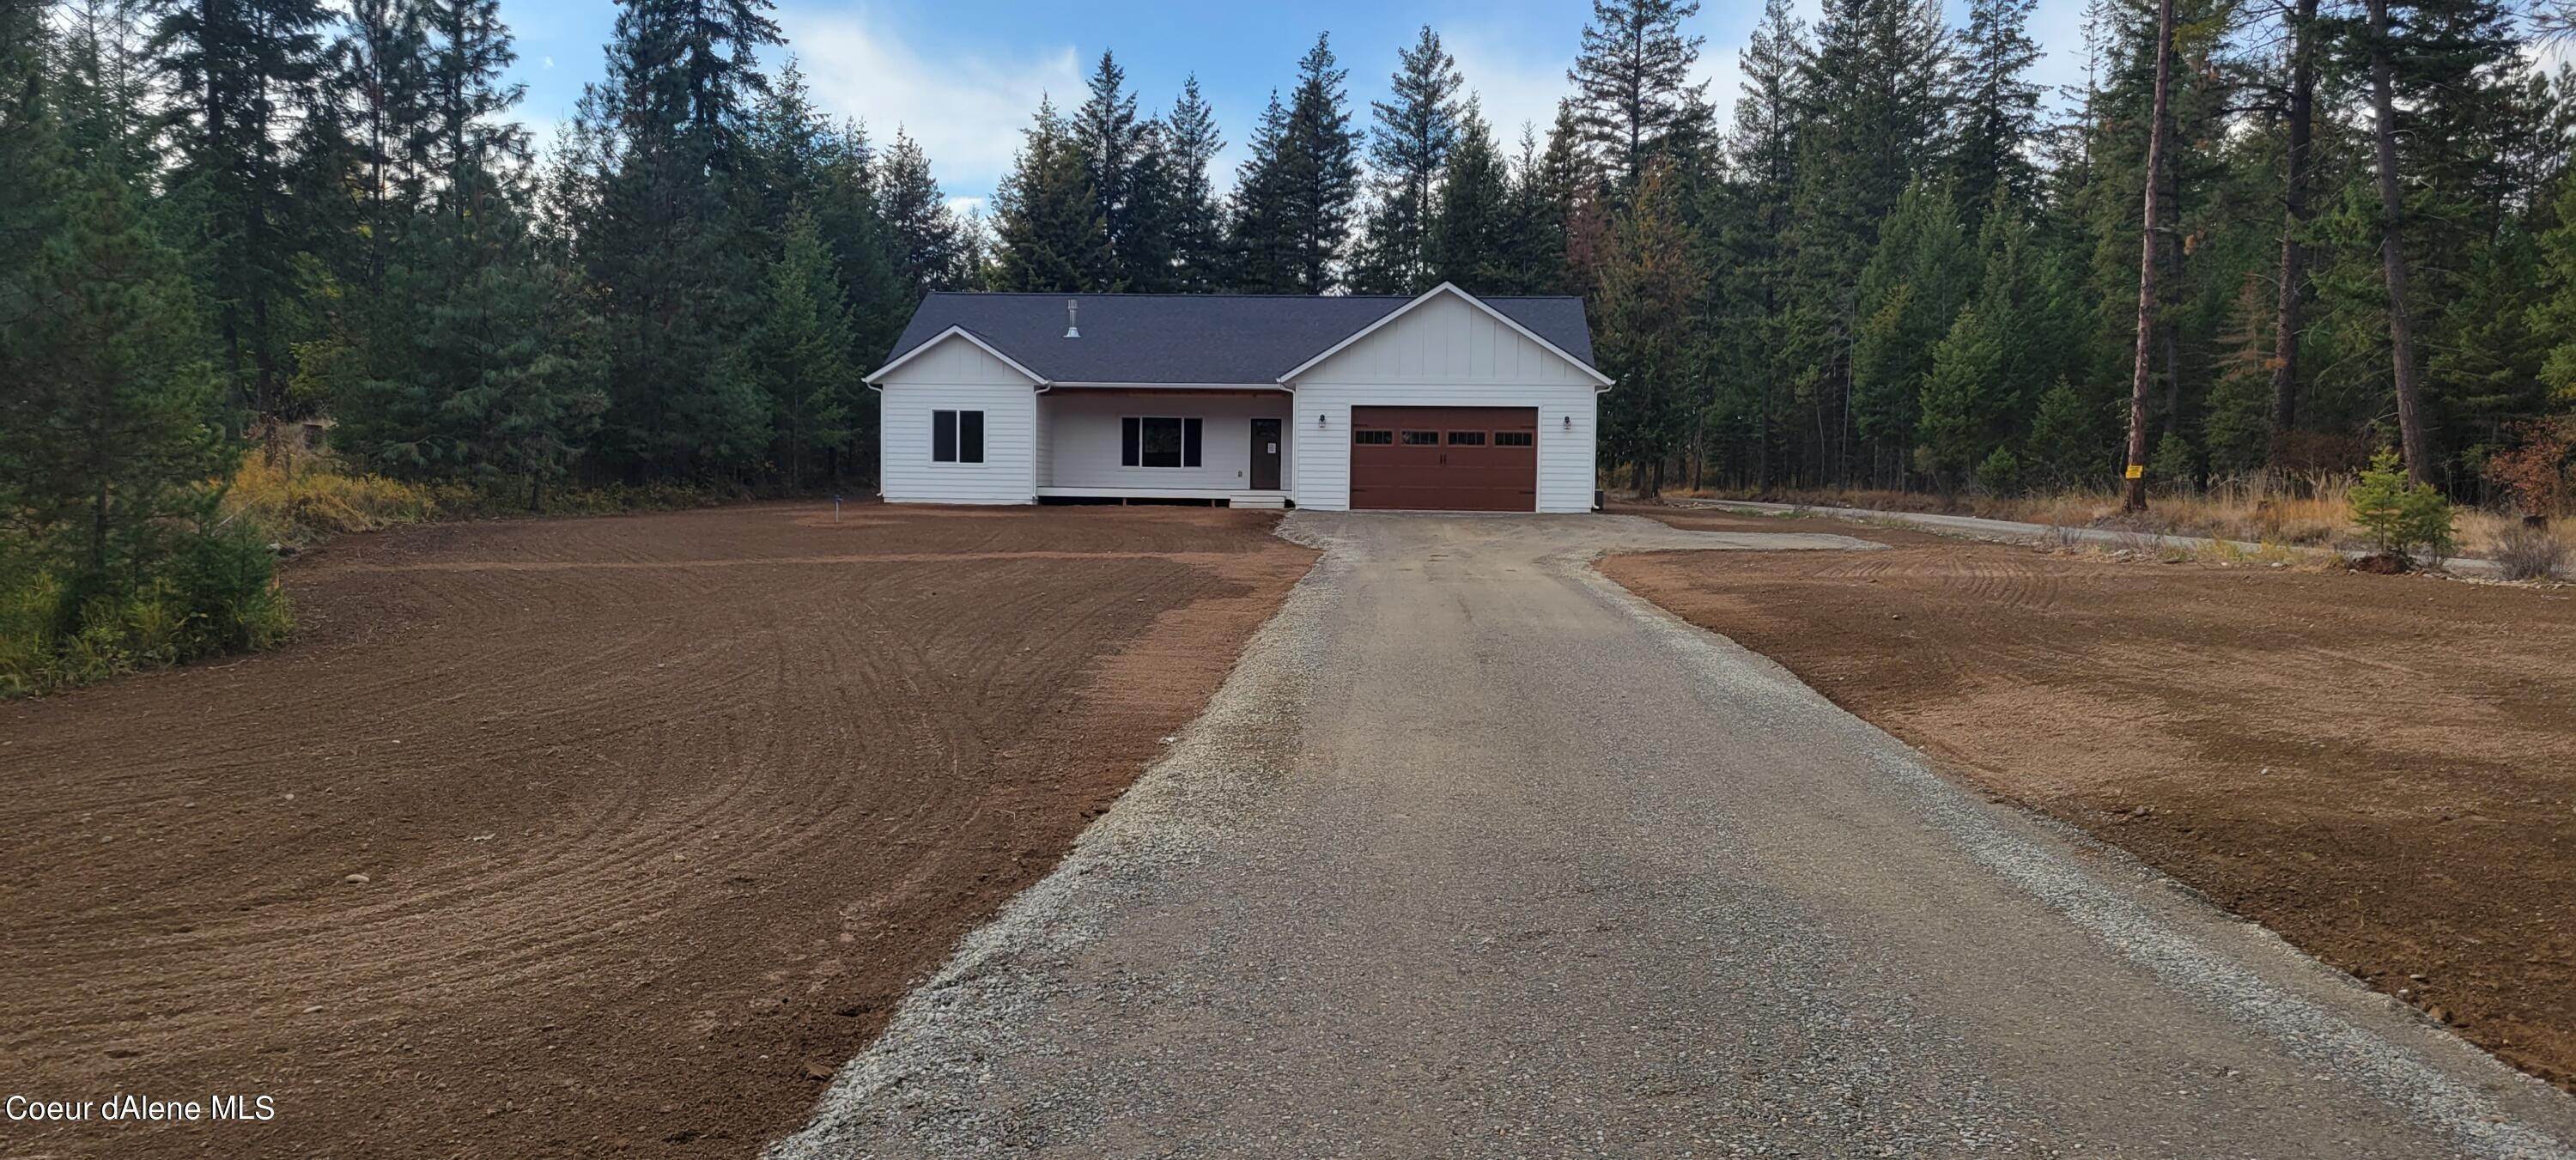 44. Single Family Homes for Sale at 166 Wells Street Moyie Springs, Idaho 83845 United States